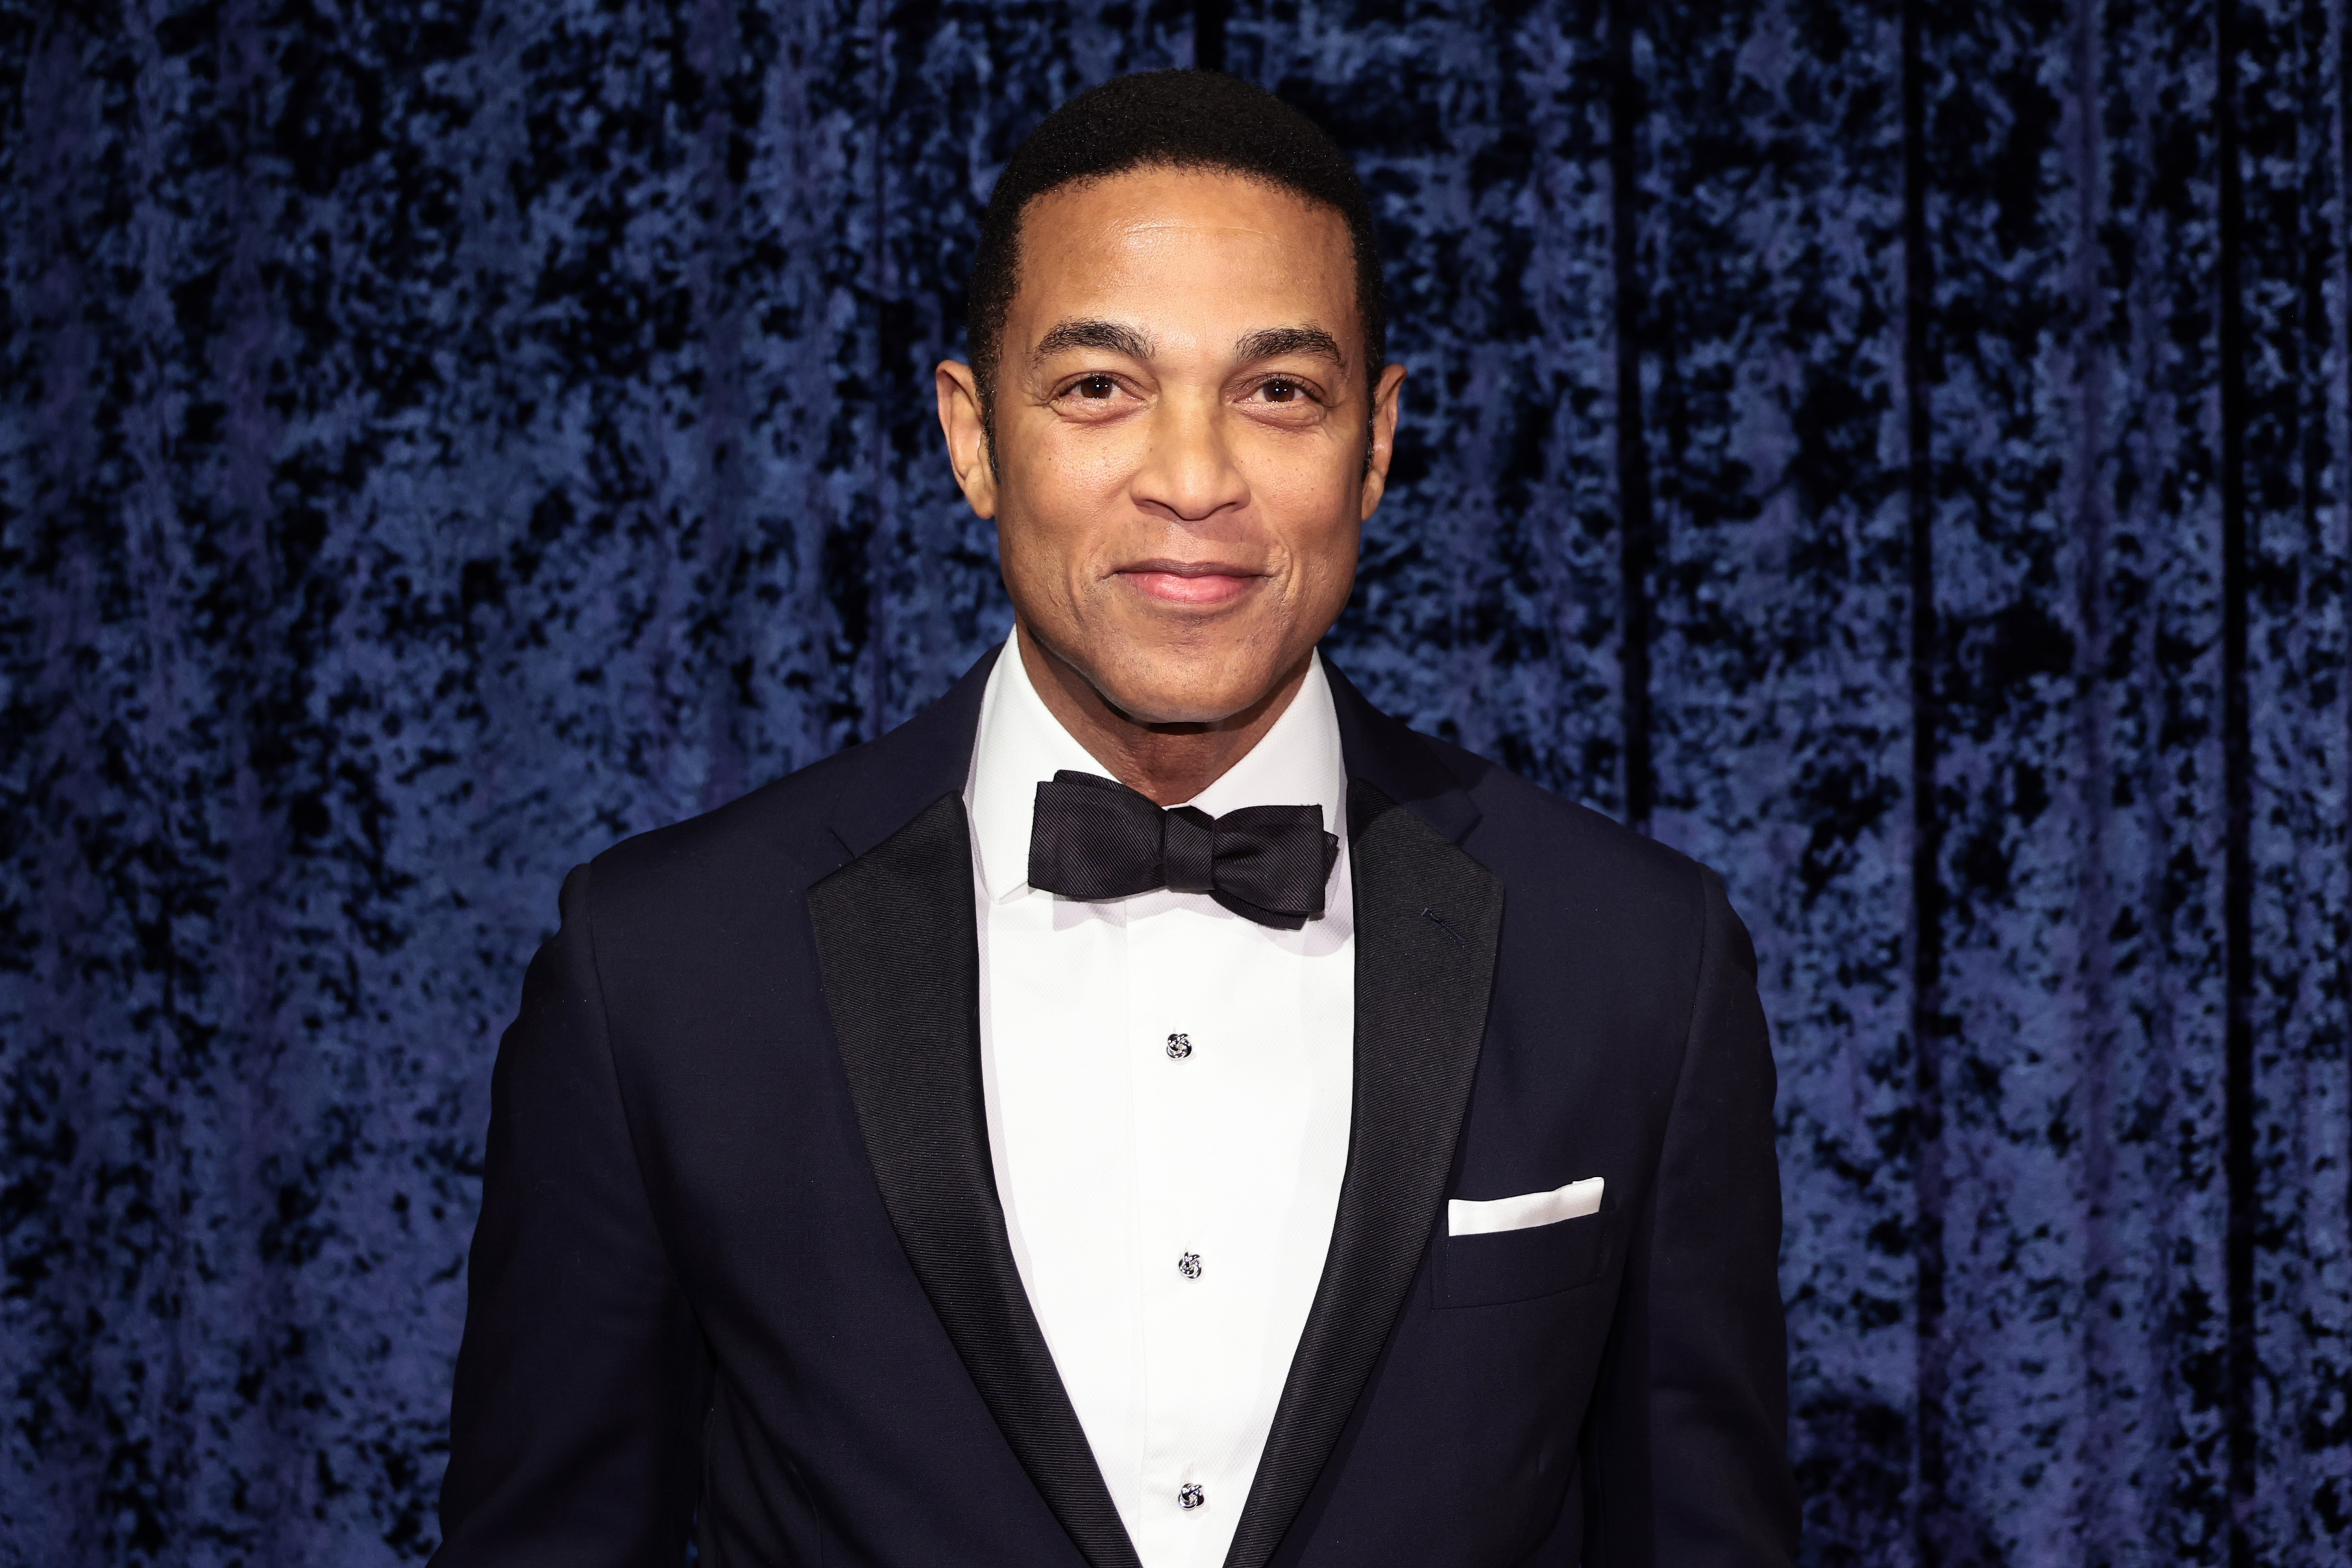 Don Lemon Assault Accuser Drops Lawsuit, Says His “Recollection” Of Events Was Wrong